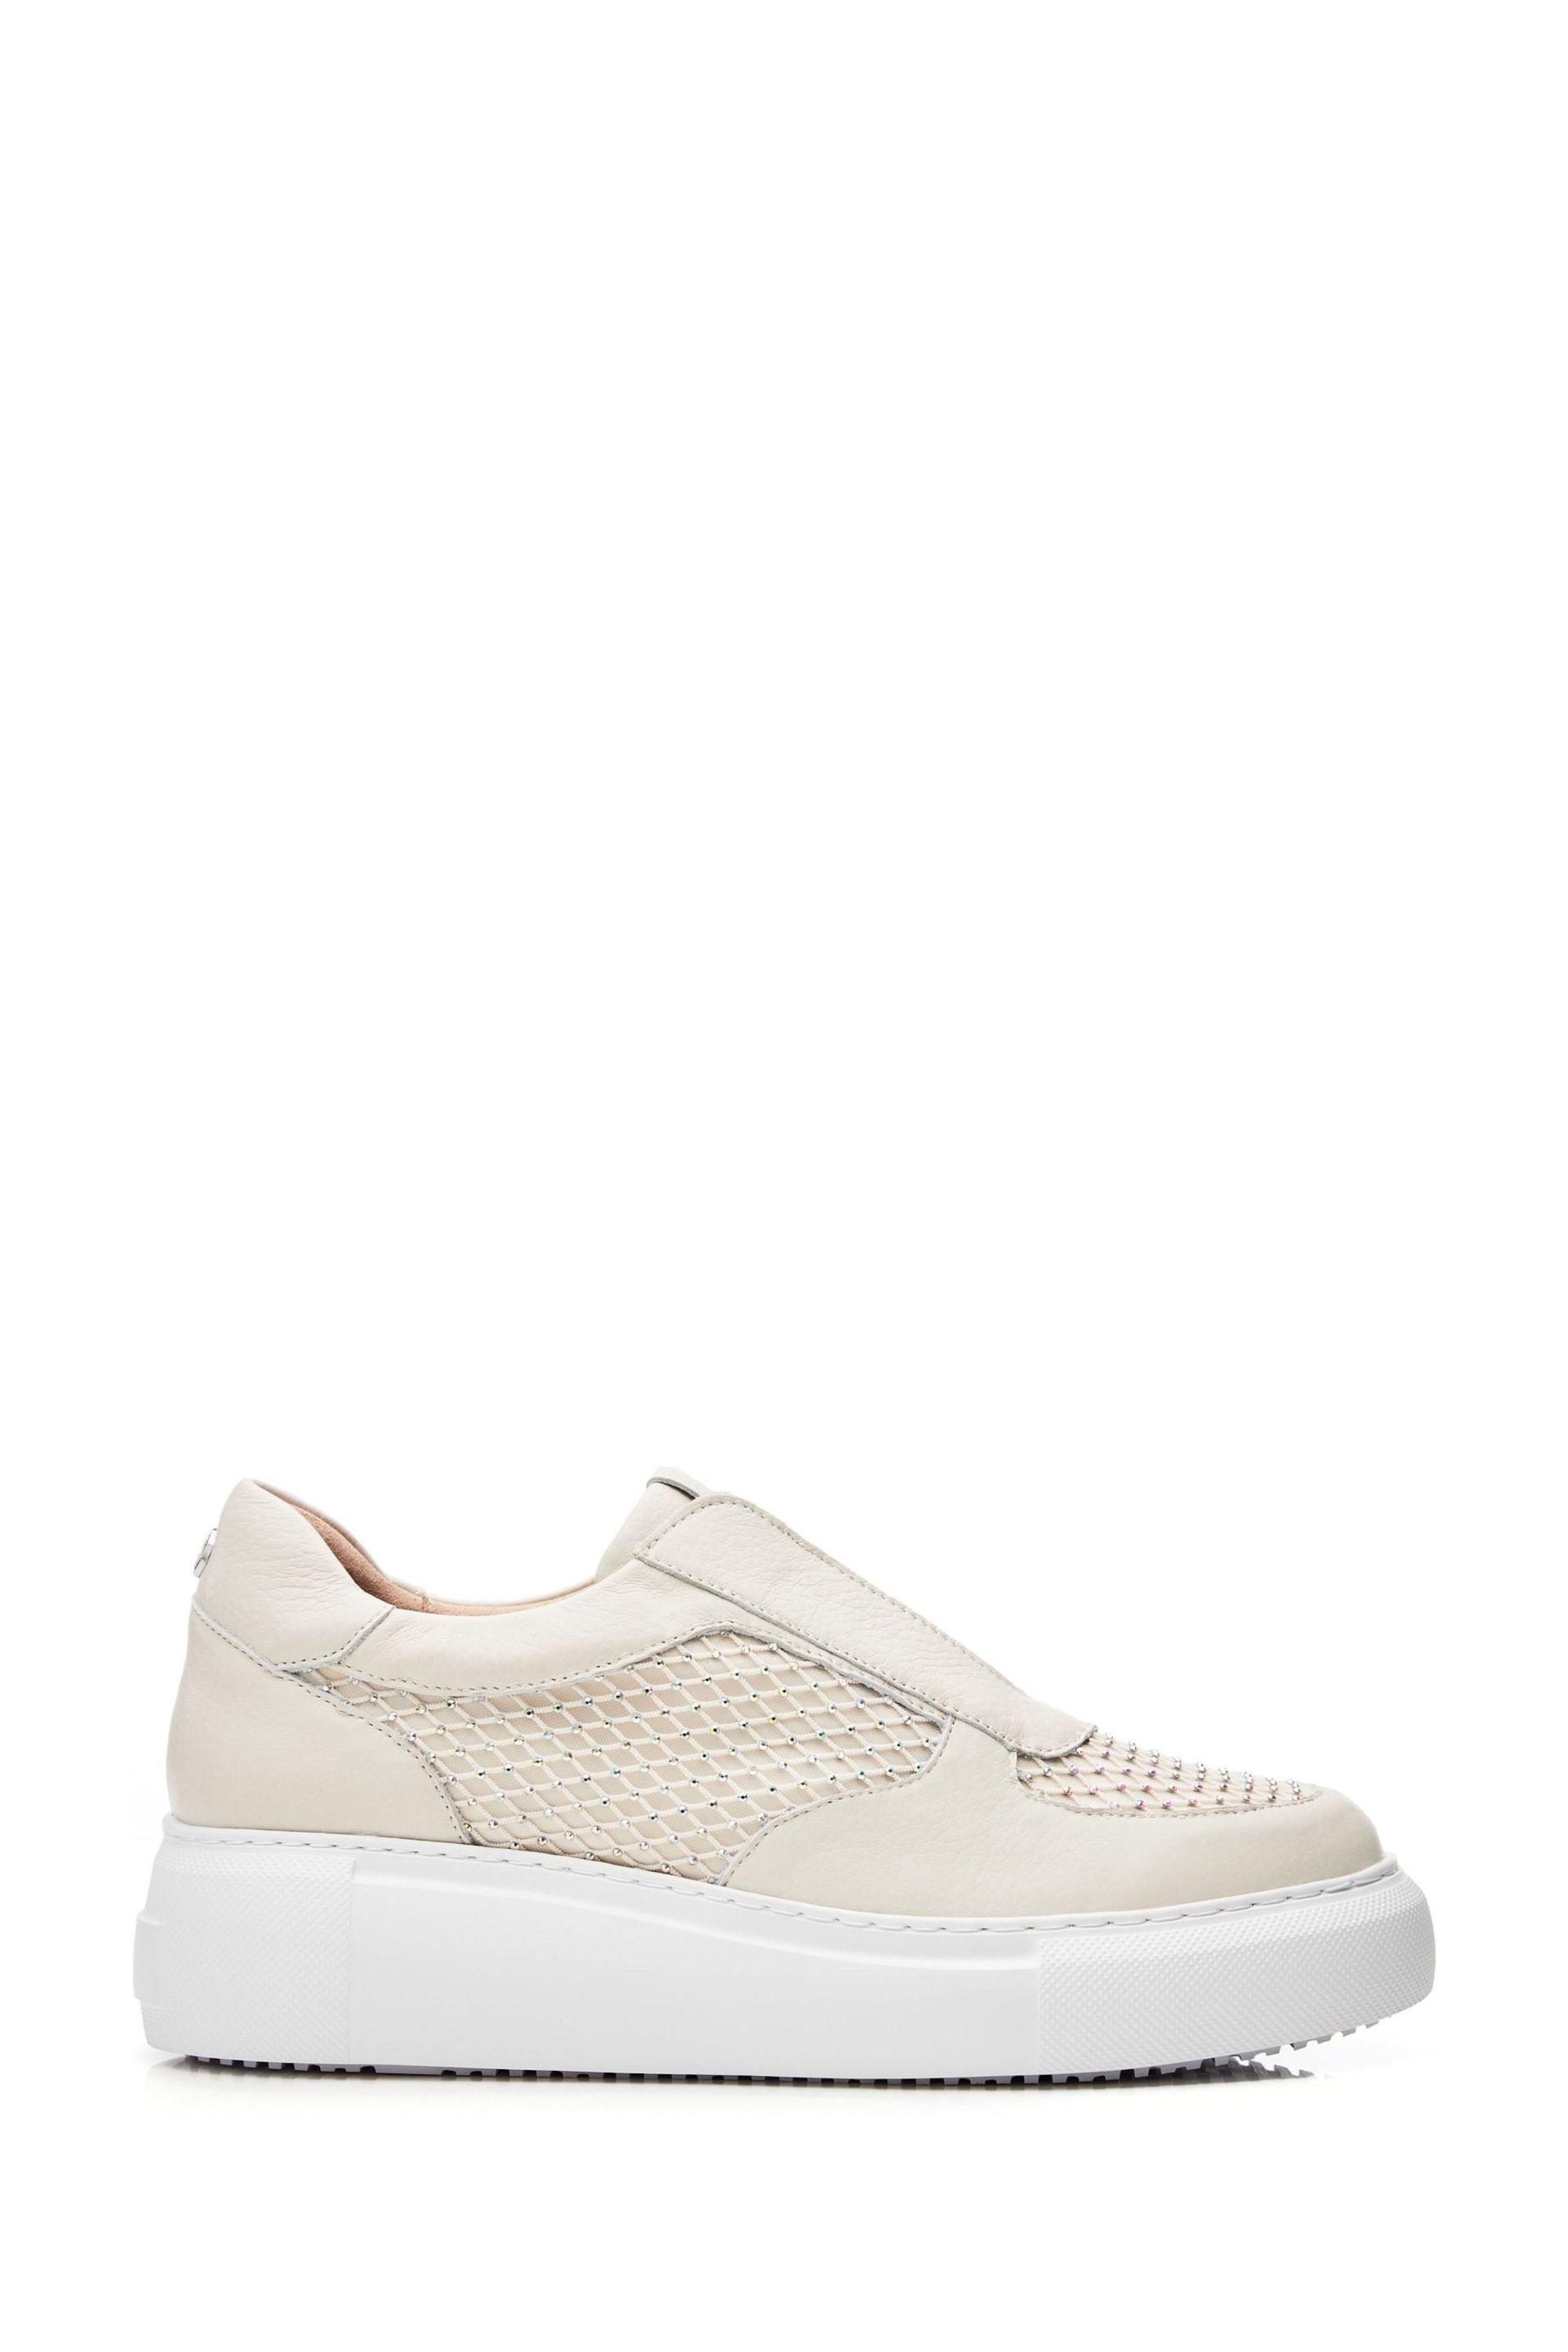 Moda in Pelle Althea Slip on Chunky Wedge White Trainers - Image 1 of 4